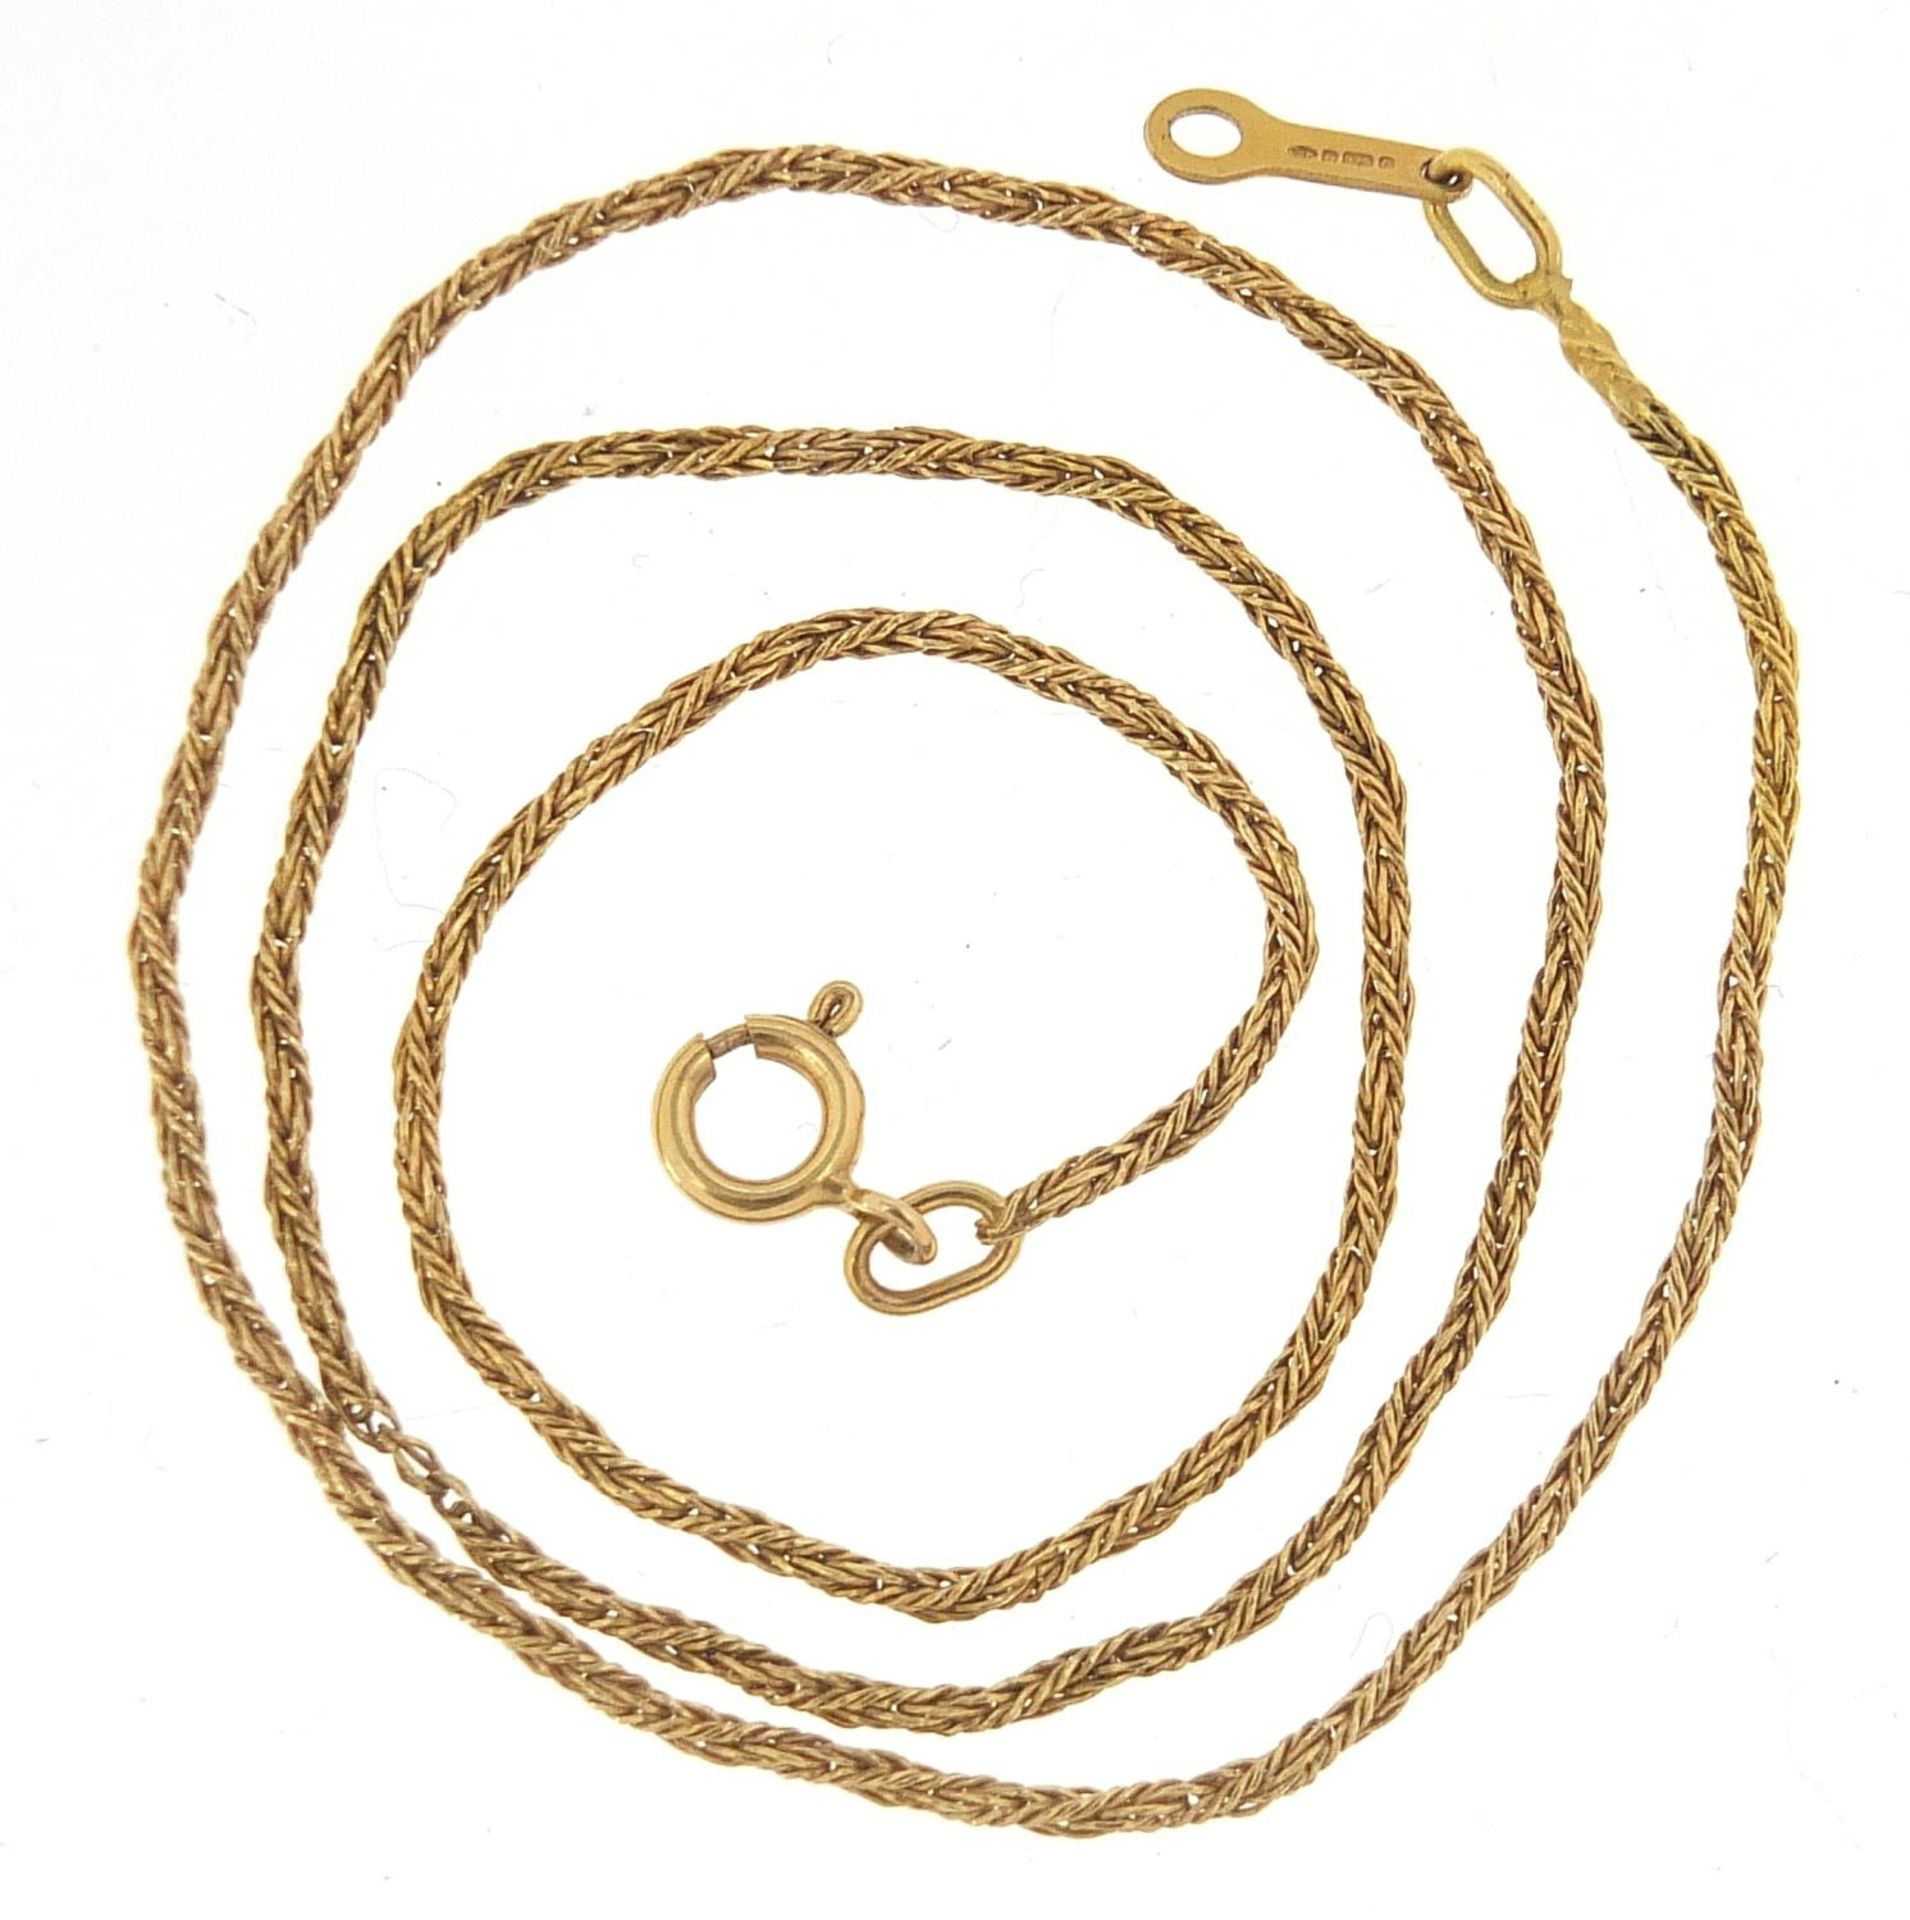 9ct gold rope twist necklace, 36cm in length, 2.9g - Image 2 of 3